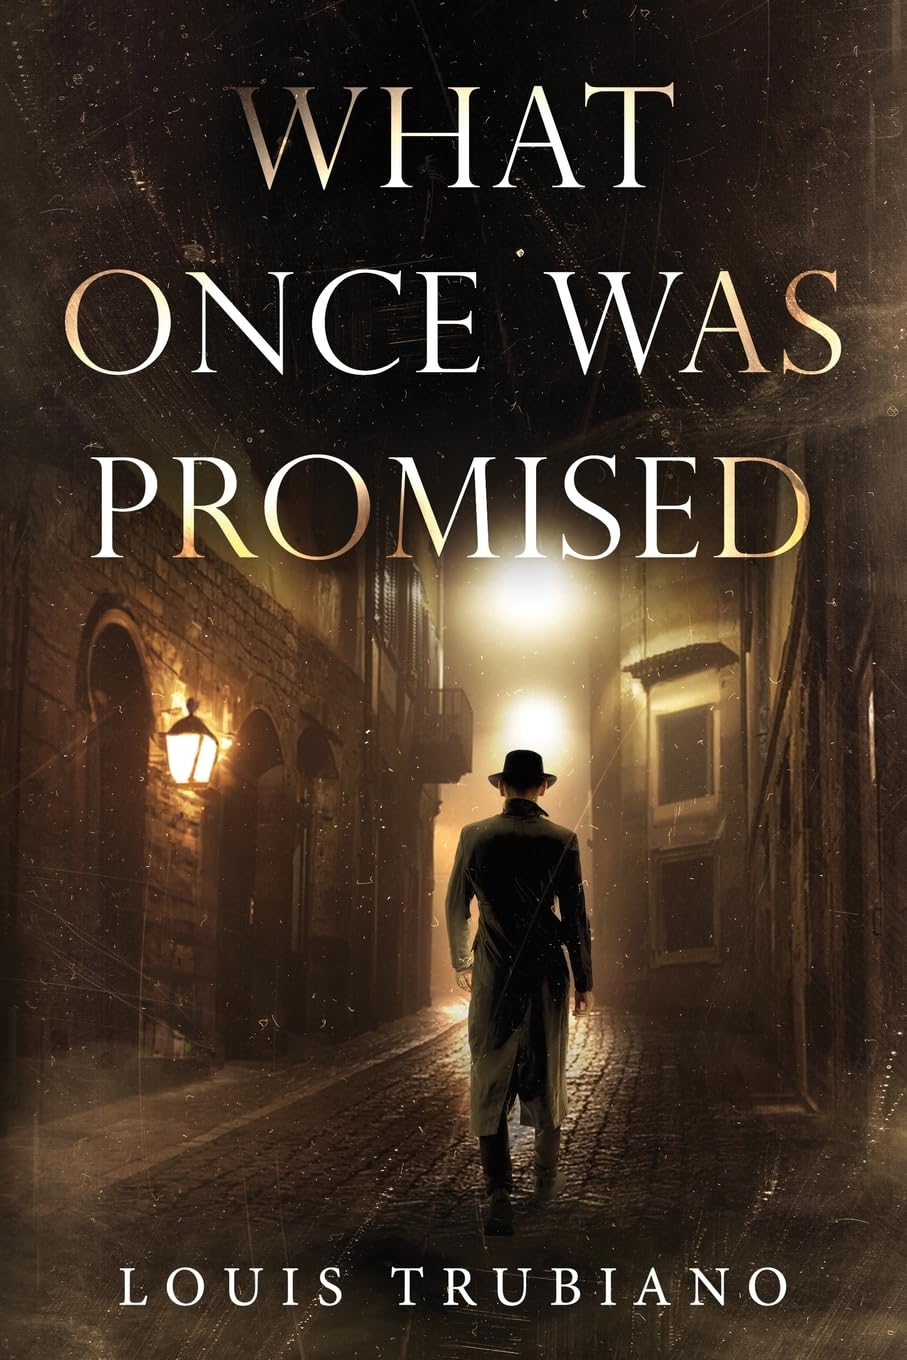 New novel "What Once Was Promised" by Louis Trubiano is released, a work of historical fiction that follows the trials and triumphs of an Italian immigrant family in 20th century Boston